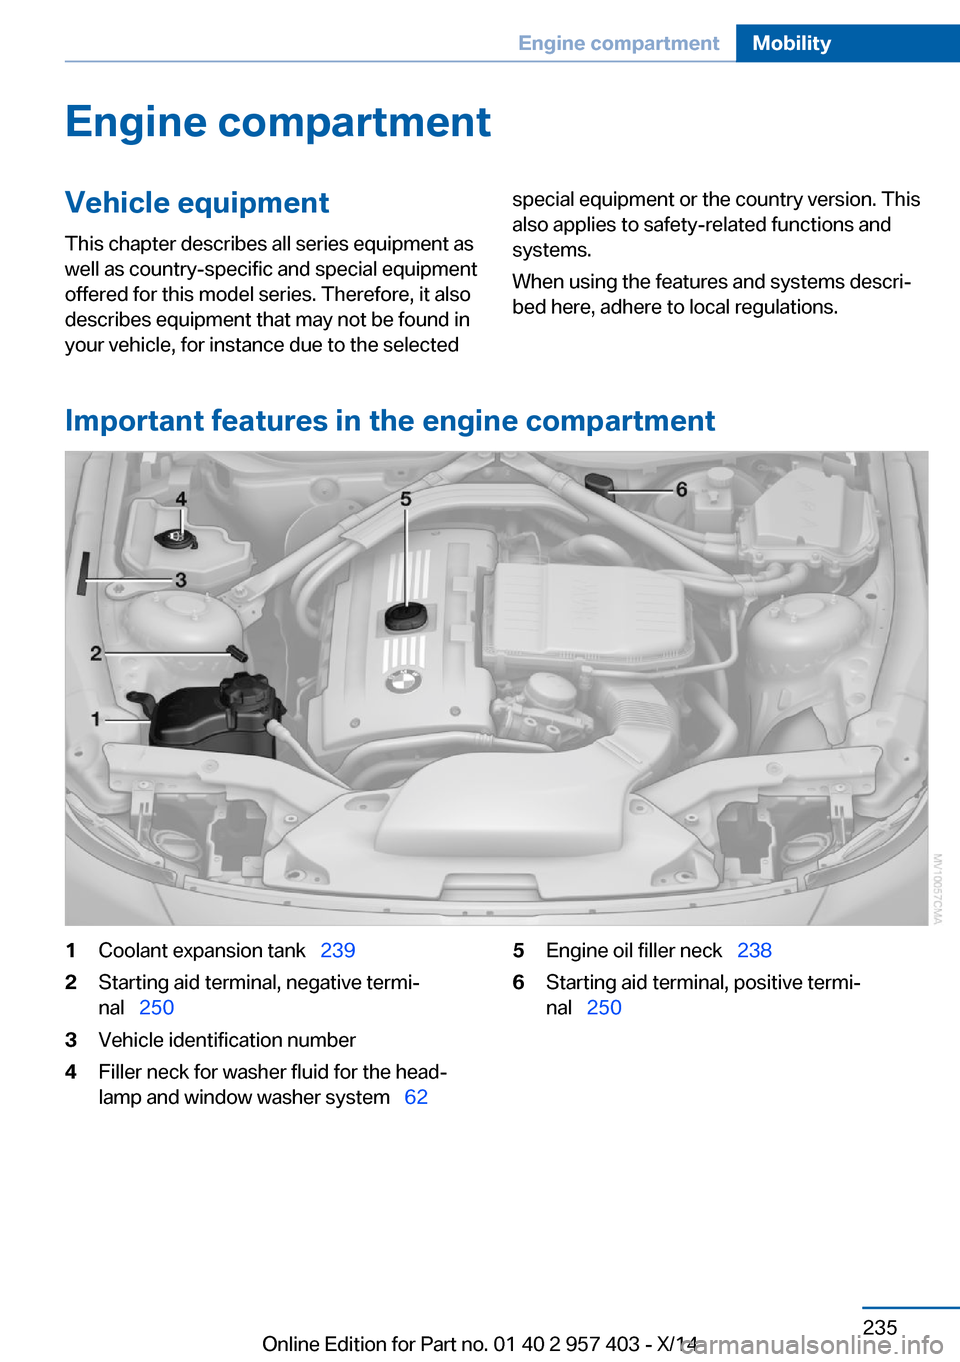 BMW Z4 2014 E89 Owners Manual Engine compartmentVehicle equipmentThis chapter describes all series equipment as
well as country-specific and special equipment
offered for this model series. Therefore, it also
describes equipment t